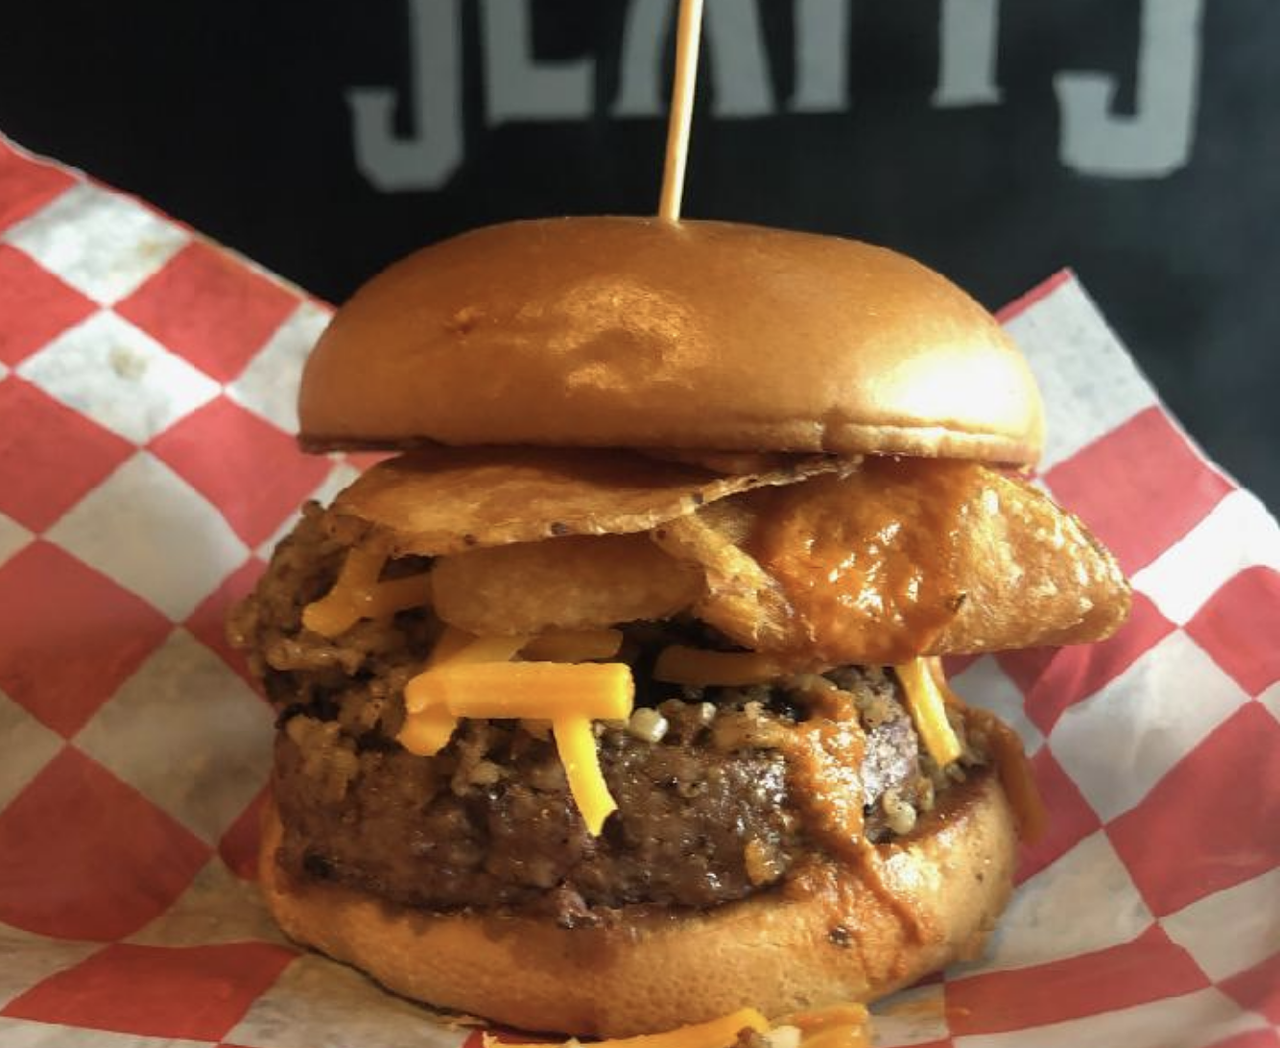 Slatt’s Pub: Exclusively Cincy
4858 Cooper Road, Blue Ash
Half-pound burger on a brioche bun. Topped with homemade goetta and Cincinnati-style chili, finely shredded cheddar cheese, and Grippo's BBQ chips.